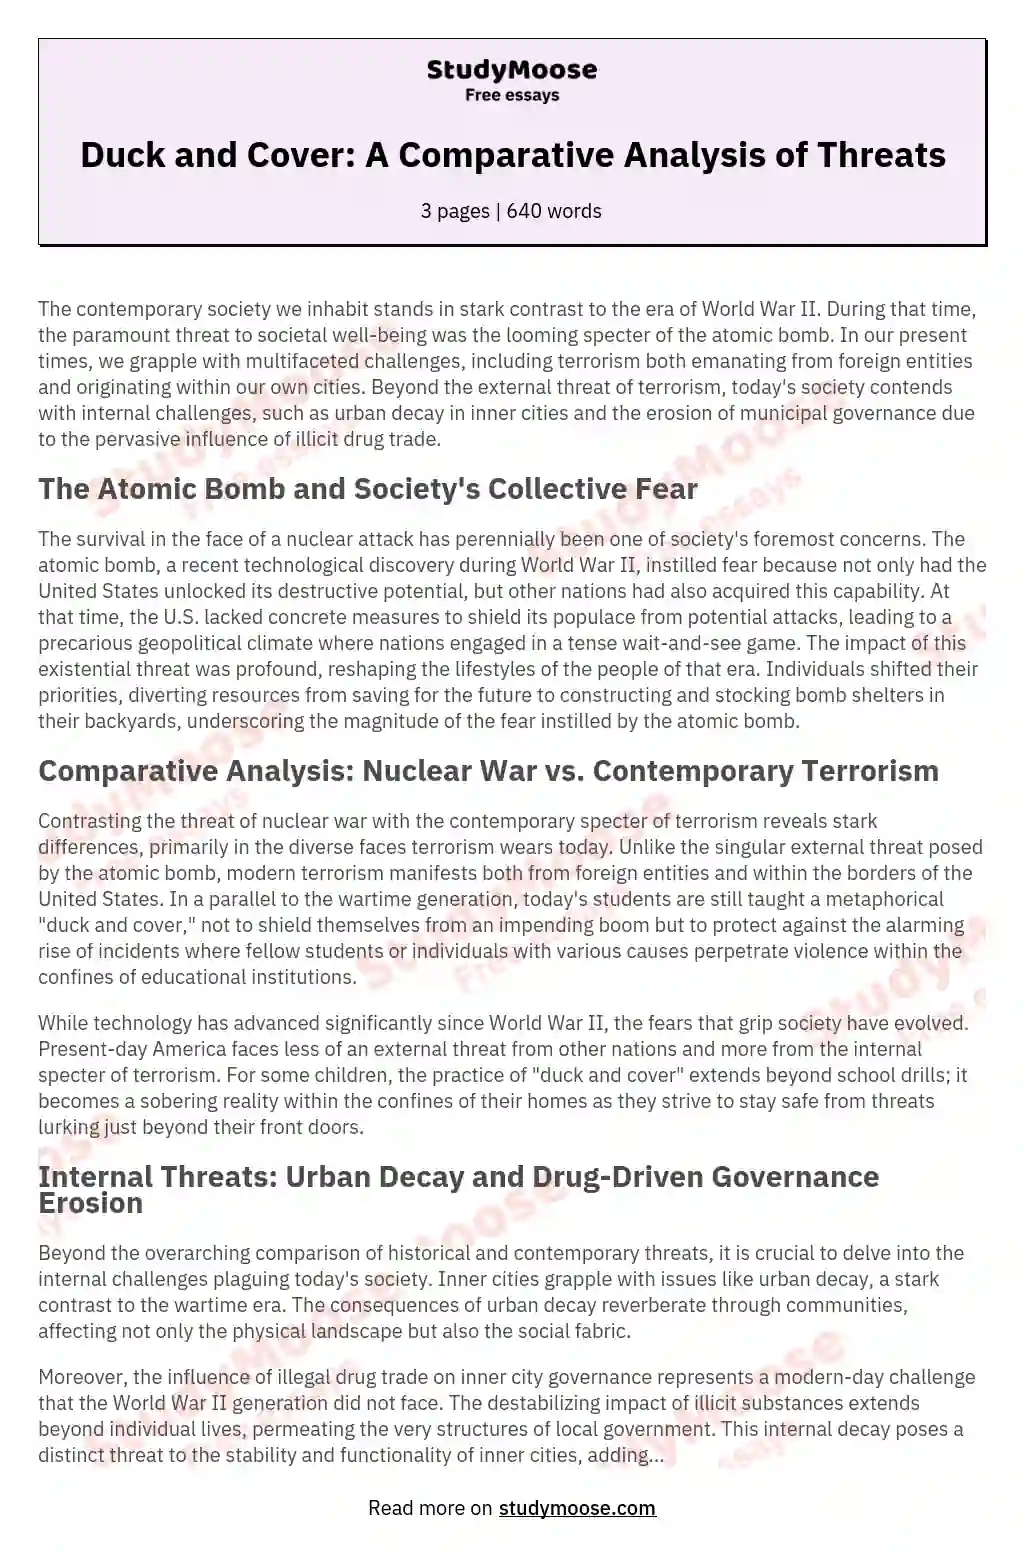 Duck and Cover: A Comparative Analysis of Threats essay